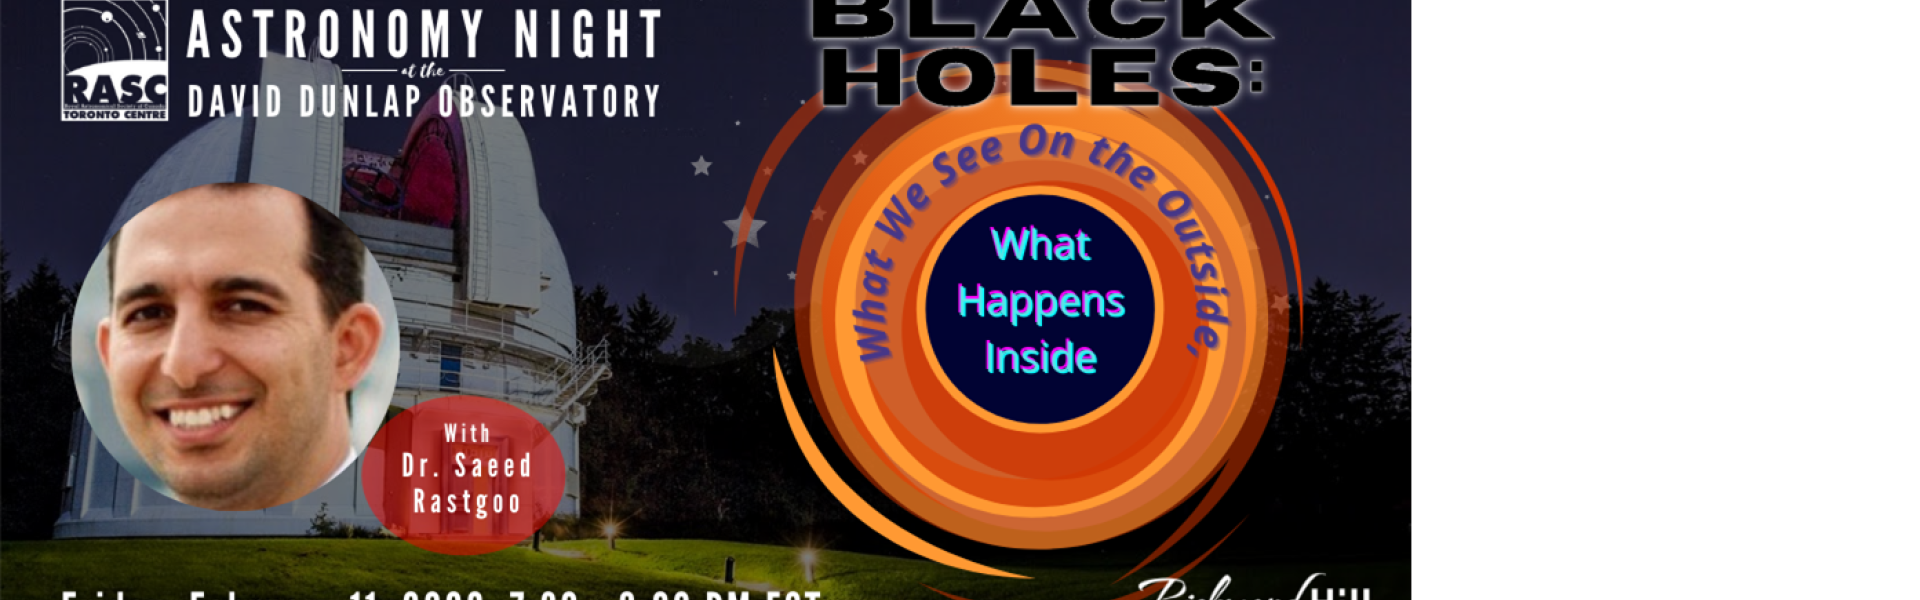 Black Holes: What We See On the Outside, What Happens Inside